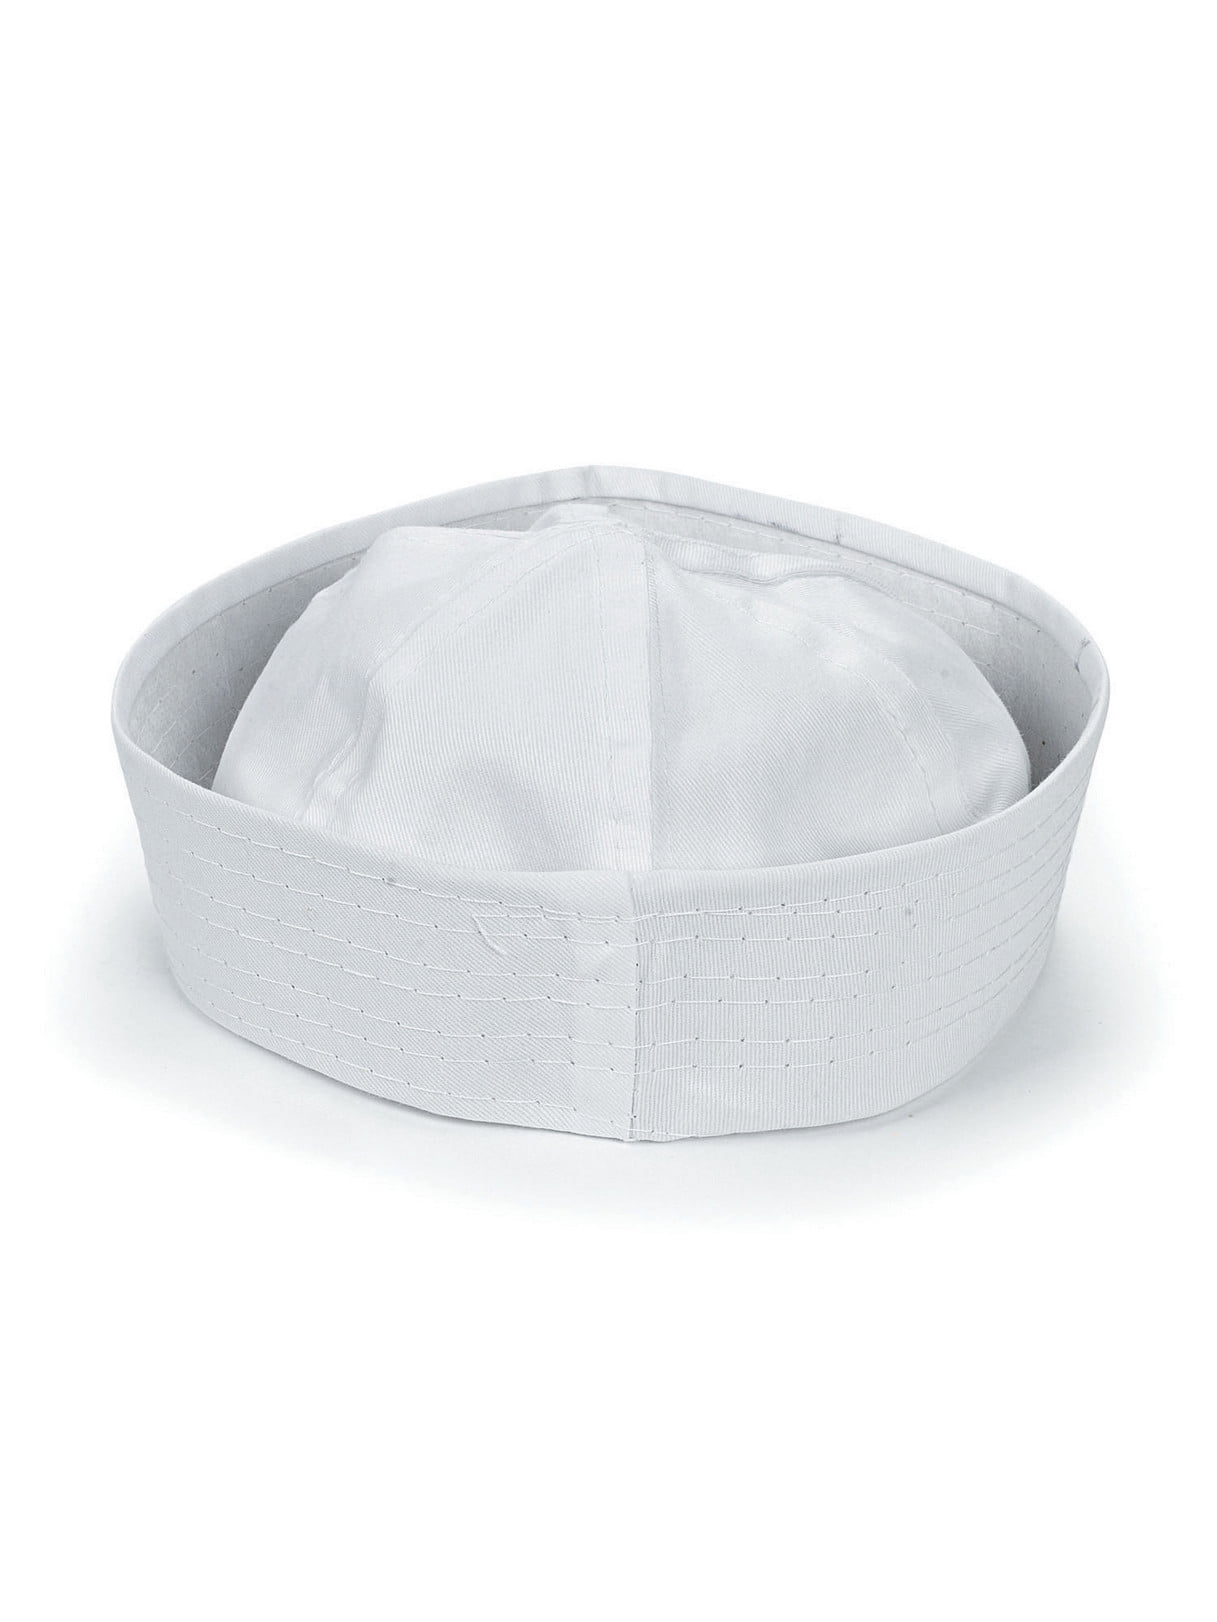 12 NEW WHITE NAVY SAILOR HATS POPEYE GILLIGAN DOUGHBOY ADULT COSTUME ACCESSORY 